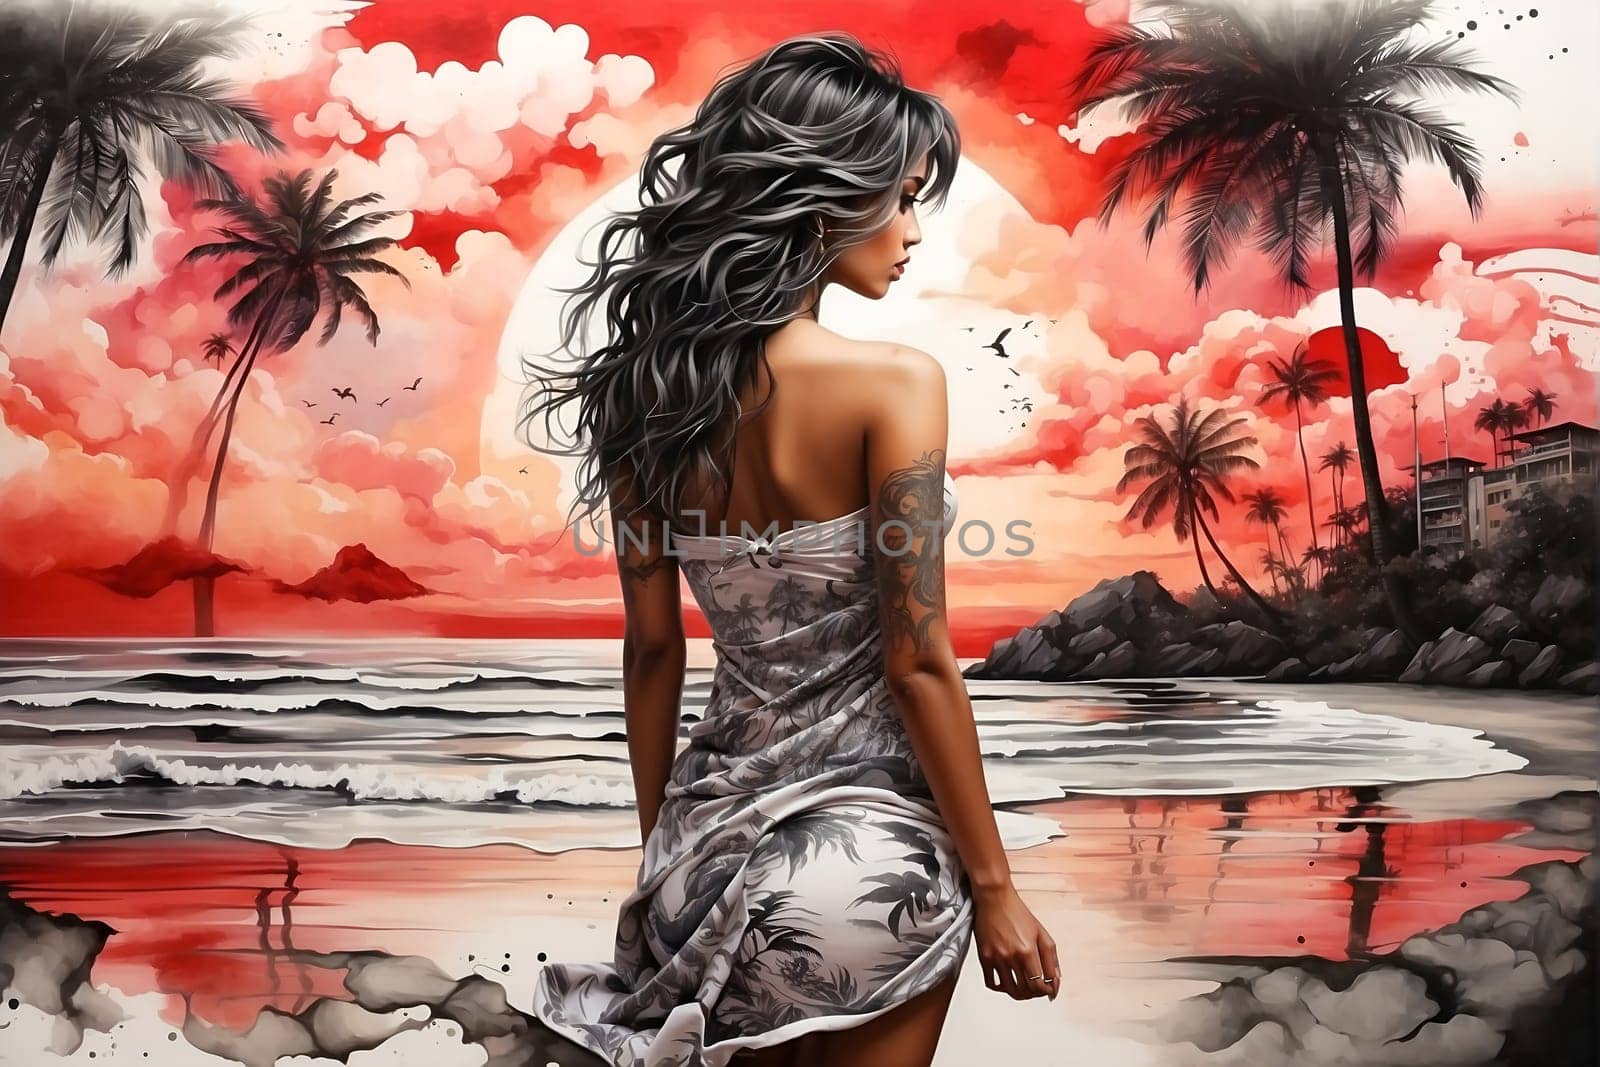 A serene painting capturing the beauty of a woman gracefully walking on a sandy beach.